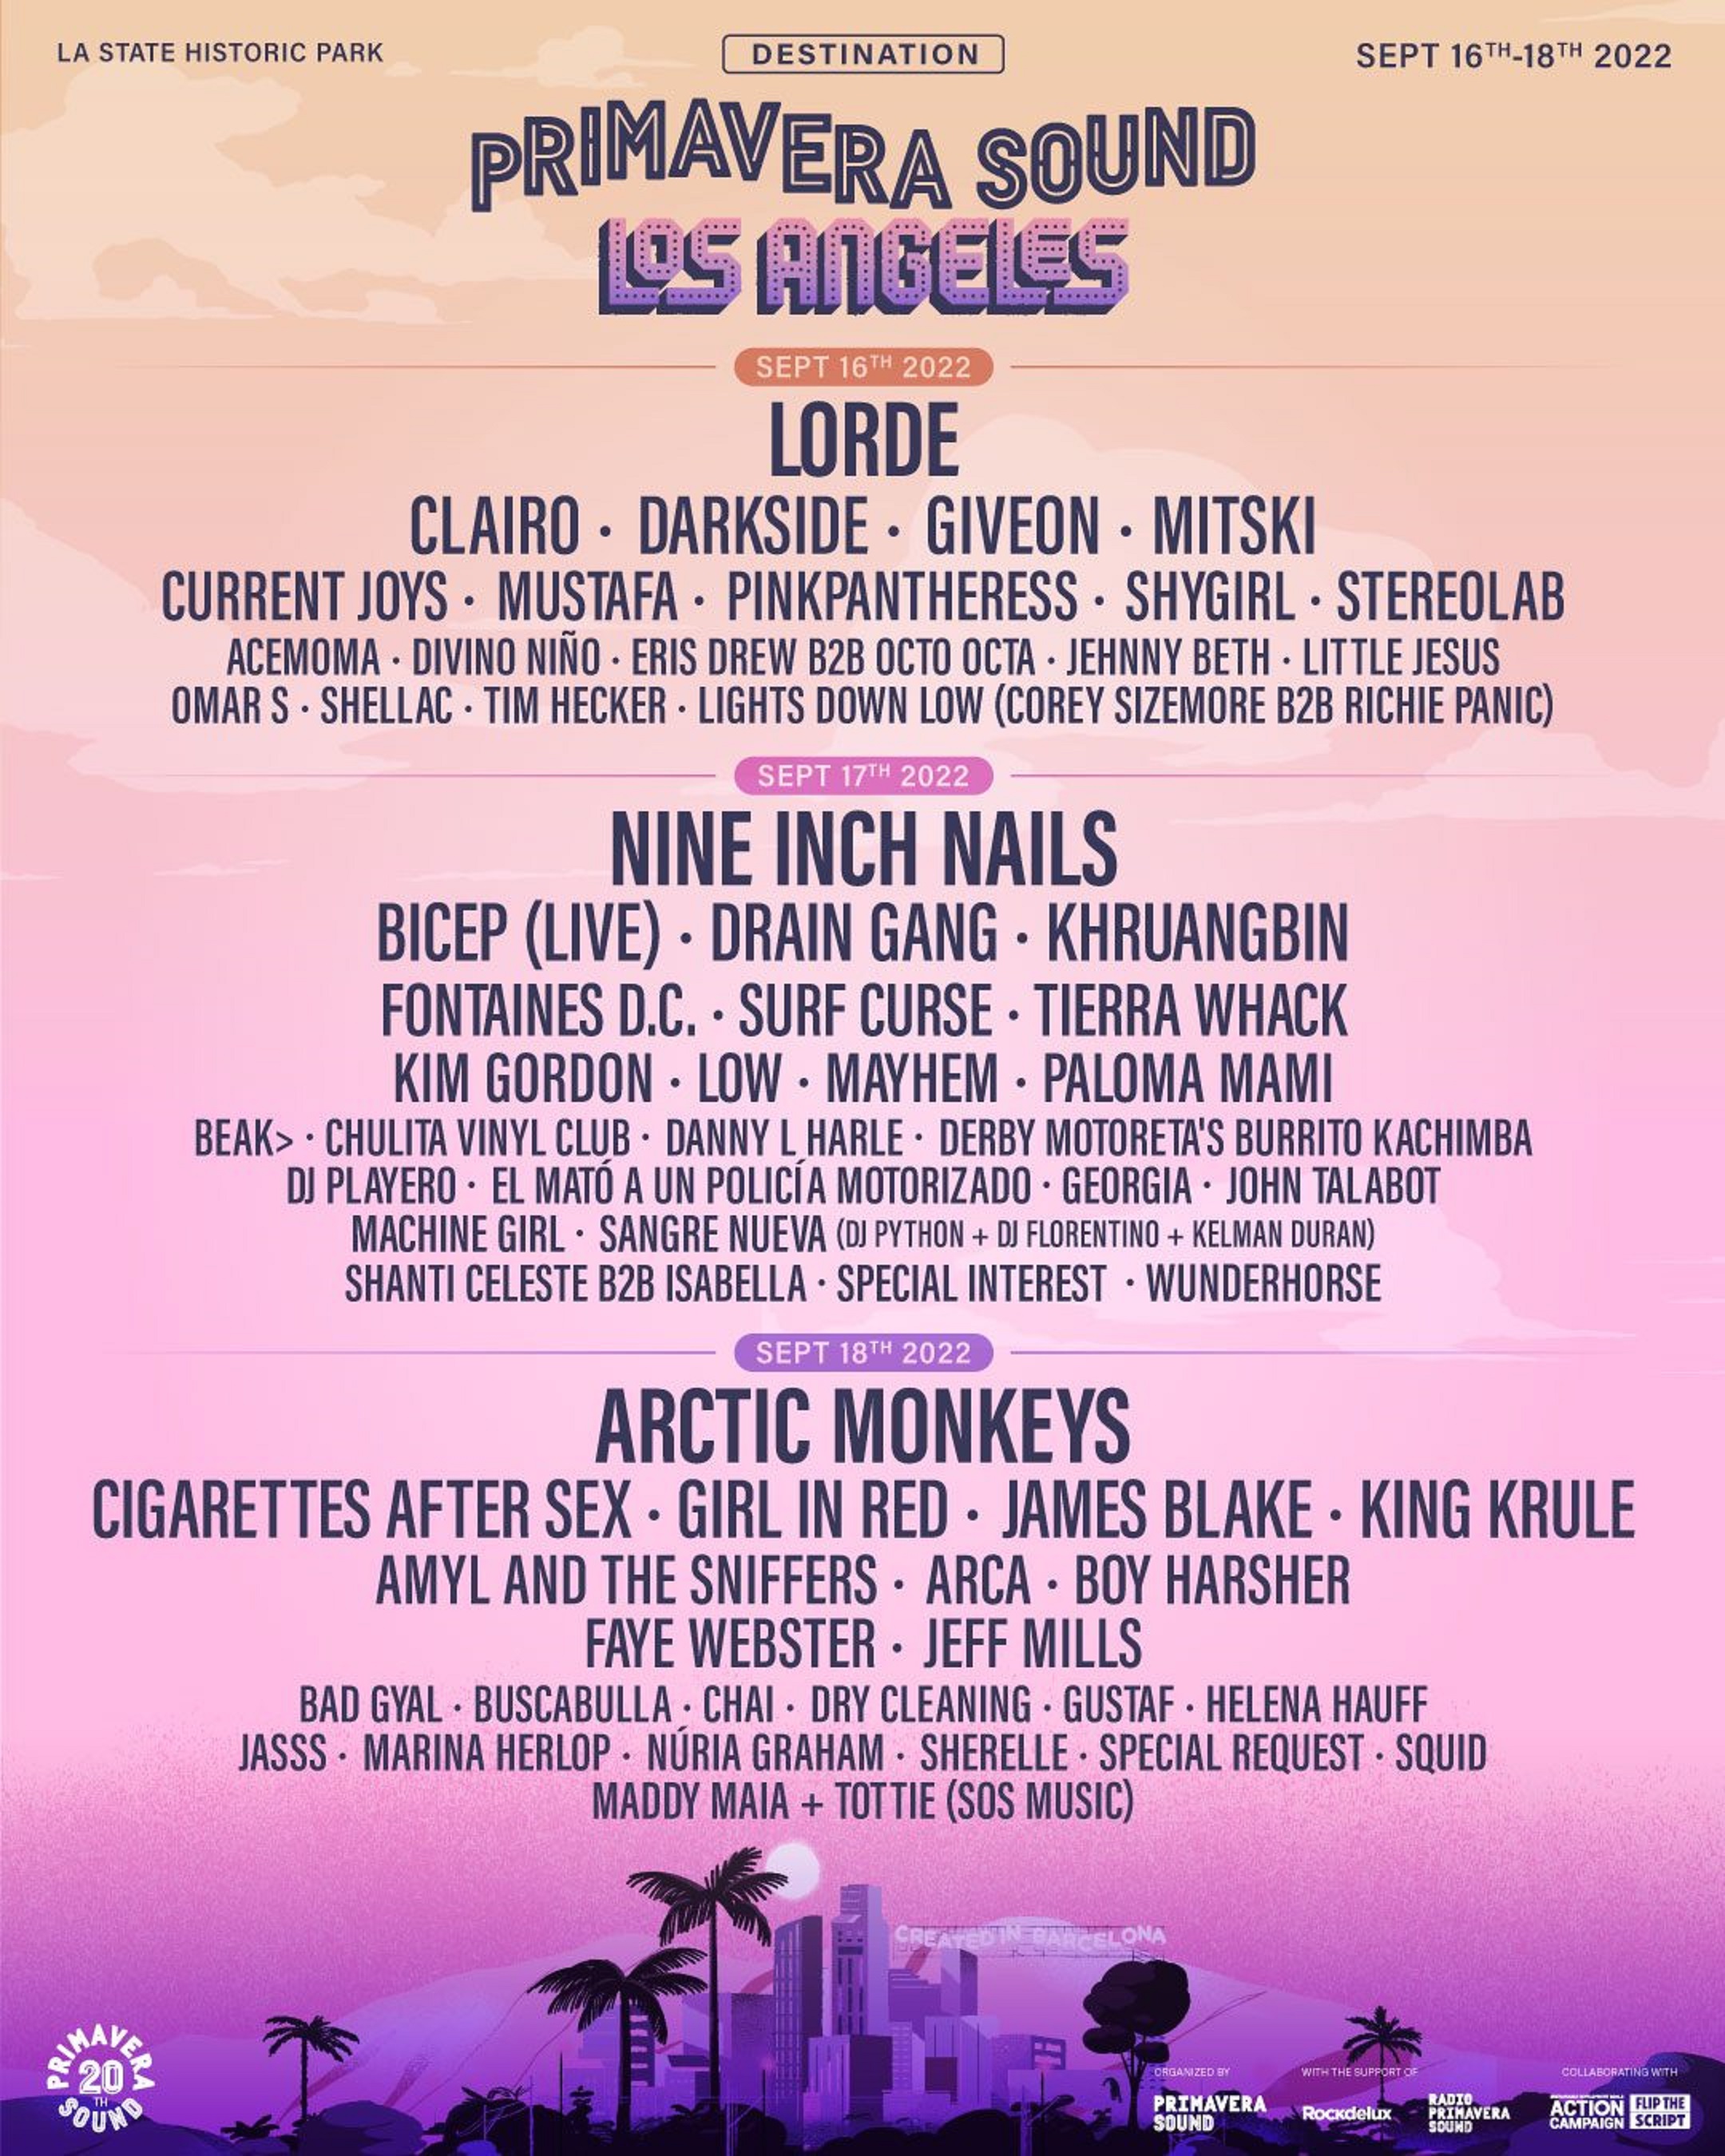 Primavera Sound Los Angeles Announces Set Times and Experiential Programming for Debut Festival